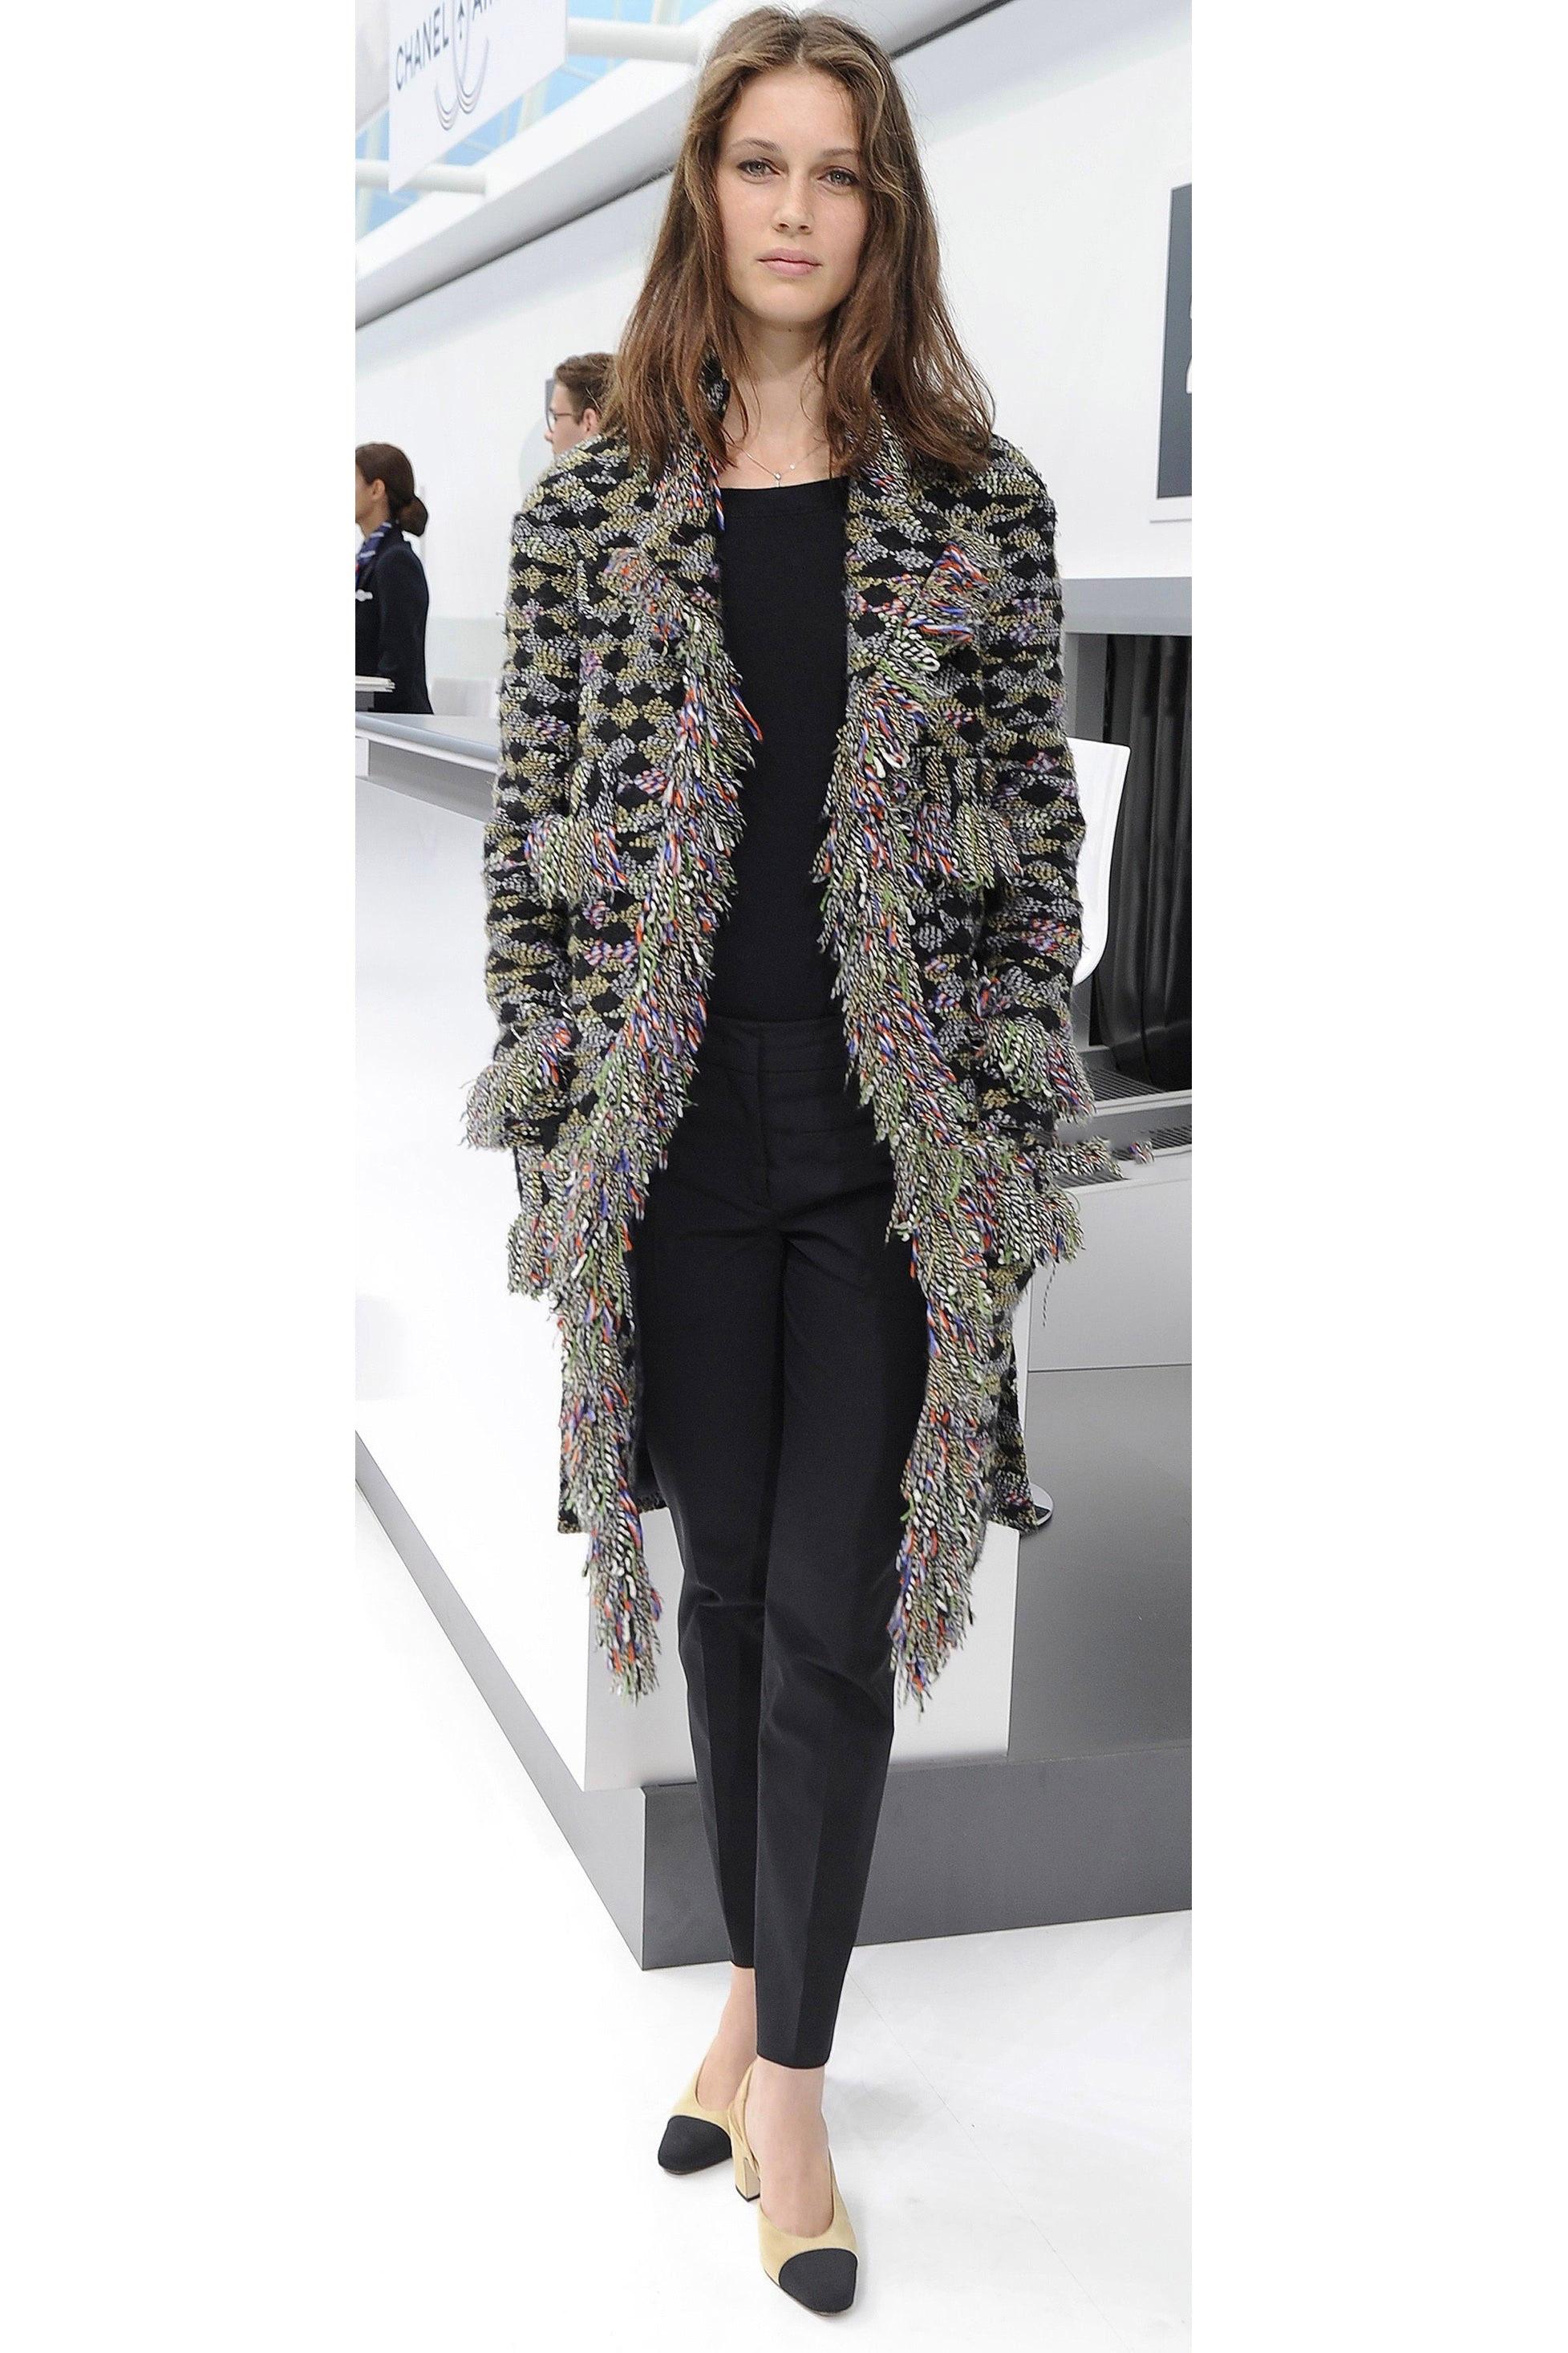 Women's Chanel Salzburg Collection Multicoloured Tweed Coat For Sale